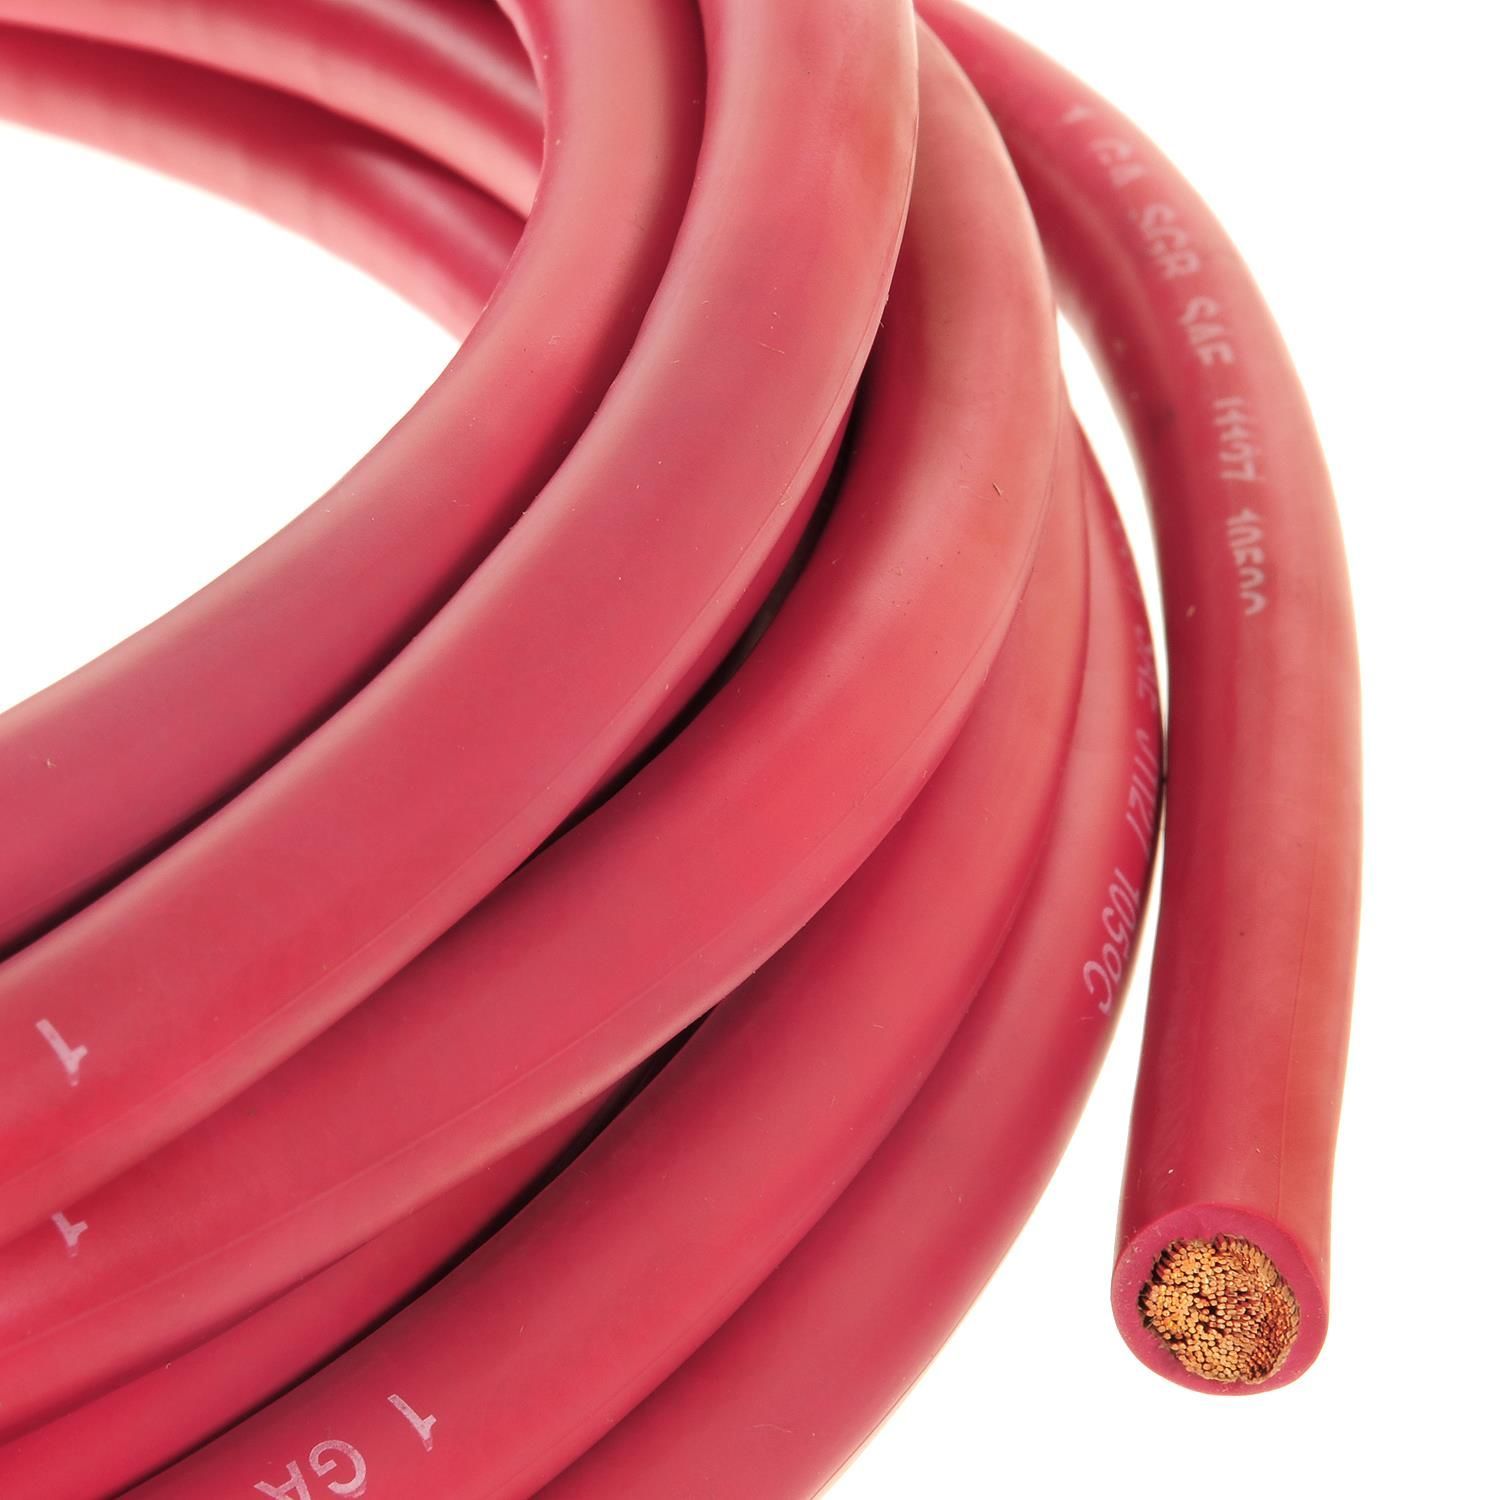 YSP CB15RD-25 Wells Bulk Cable (Red, 25', 1G)